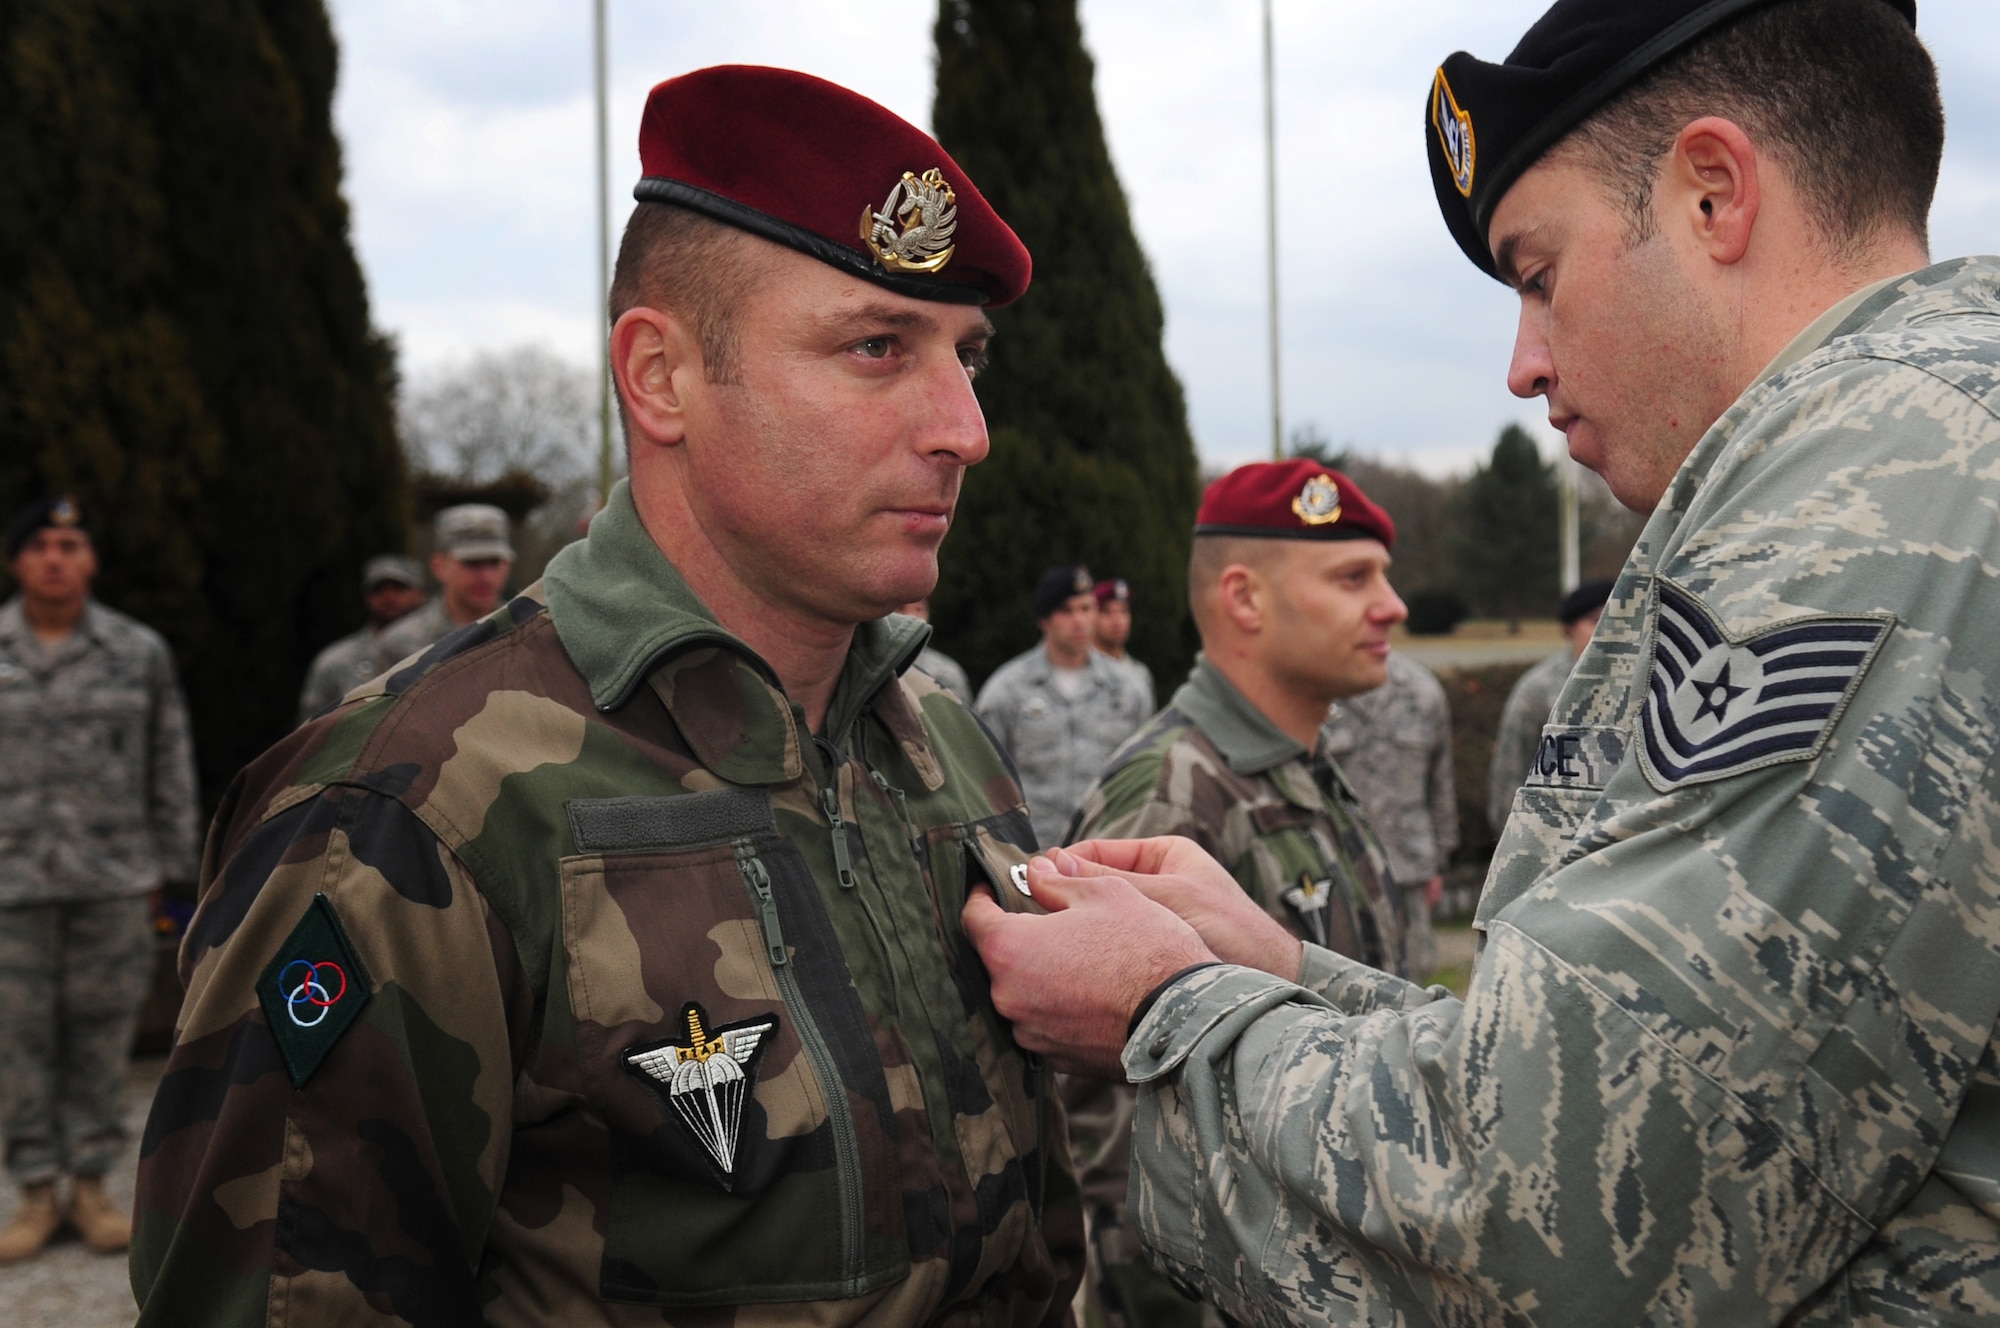 After a week of training and jumping together, U.S. Air Force Tech. Sgt. Jason Shaffer presents U.S. military jump wings to French Airborne Academy instructor Master Sgt. Stephane Paternotte during a formal ceremony concluding the week, March 4, 2010.  Members of the 435th Contingency Response Group and the 5th Quartermaster Company joined with their French military counterparts for a week of training at the École des troupes aéroportées (ETAP), or School of Airborne Troops, a military school dedicated to training the military paratroopers   of the French army, located in the town of Pau, in the département  of Pyrénées-Atlantiques , France.  The ETAP is responsible for training paratroopers, and for international cooperation and promotion of paratroop culture. (U.S. Air Force Photo by Staff Sgt. Jocelyn Rich)